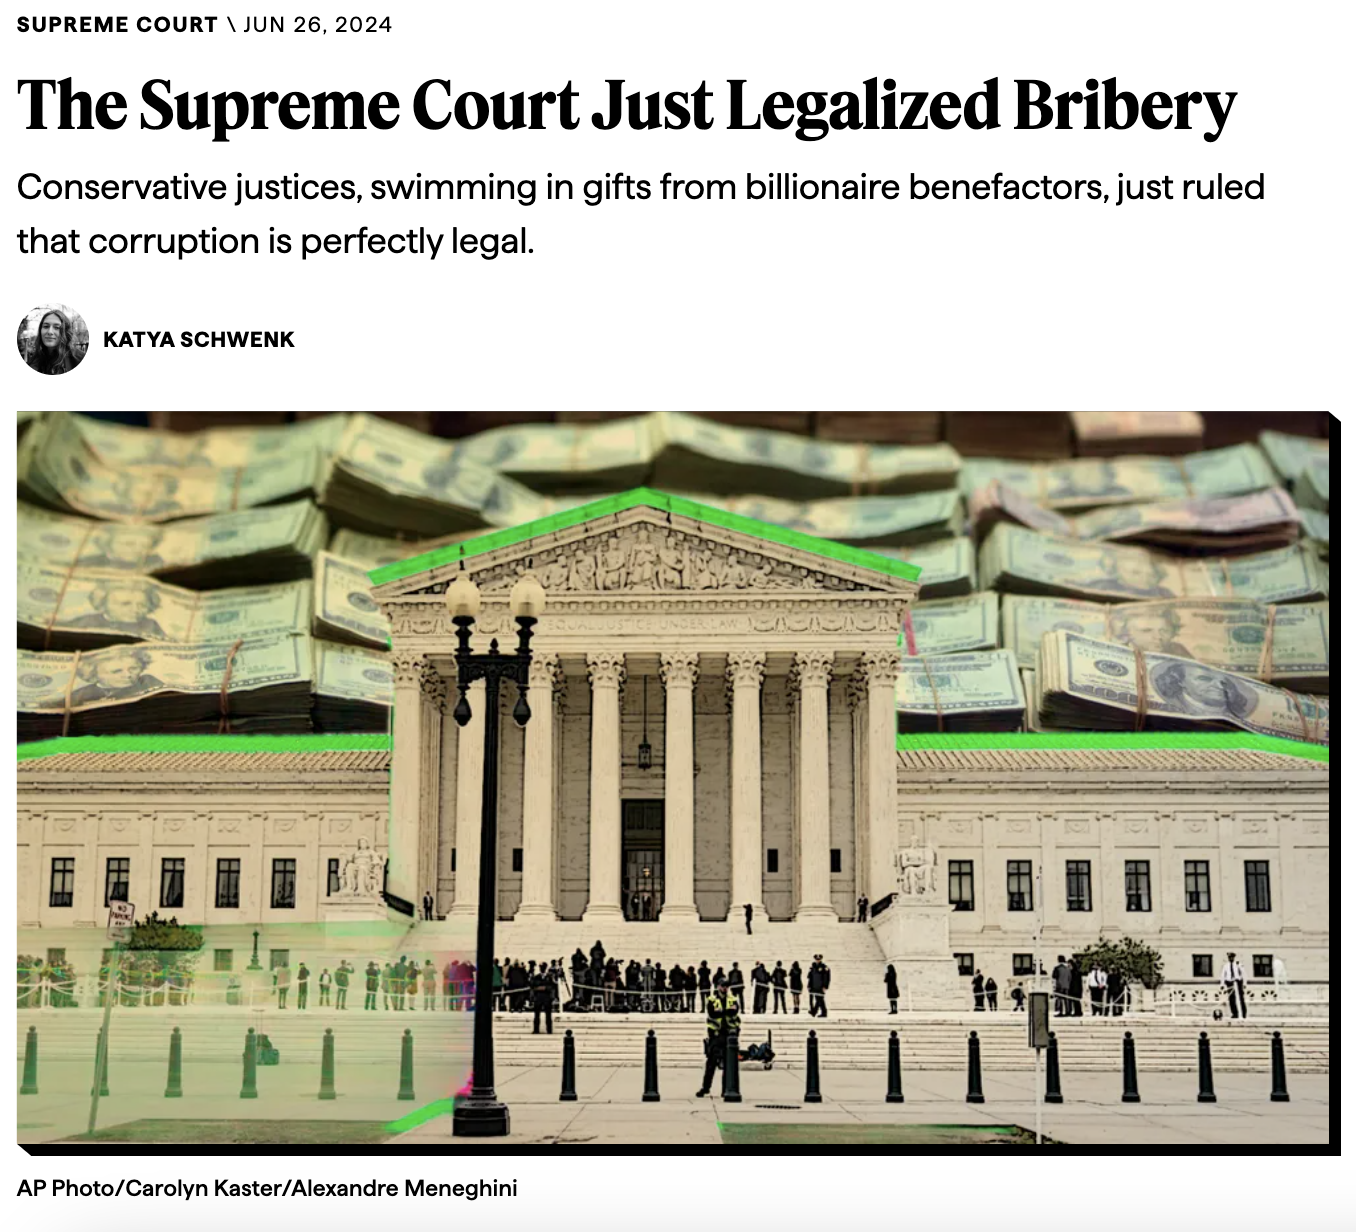 wonders of the world - Supreme Court The Supreme Court Just Legalized Bribery Conservative justices, swimming in gifts from billionaire benefactors, just ruled that corruption is perfectly legal. Katya Schwenk Ap PhotoCarolyn KasterAlexandre Meneghini